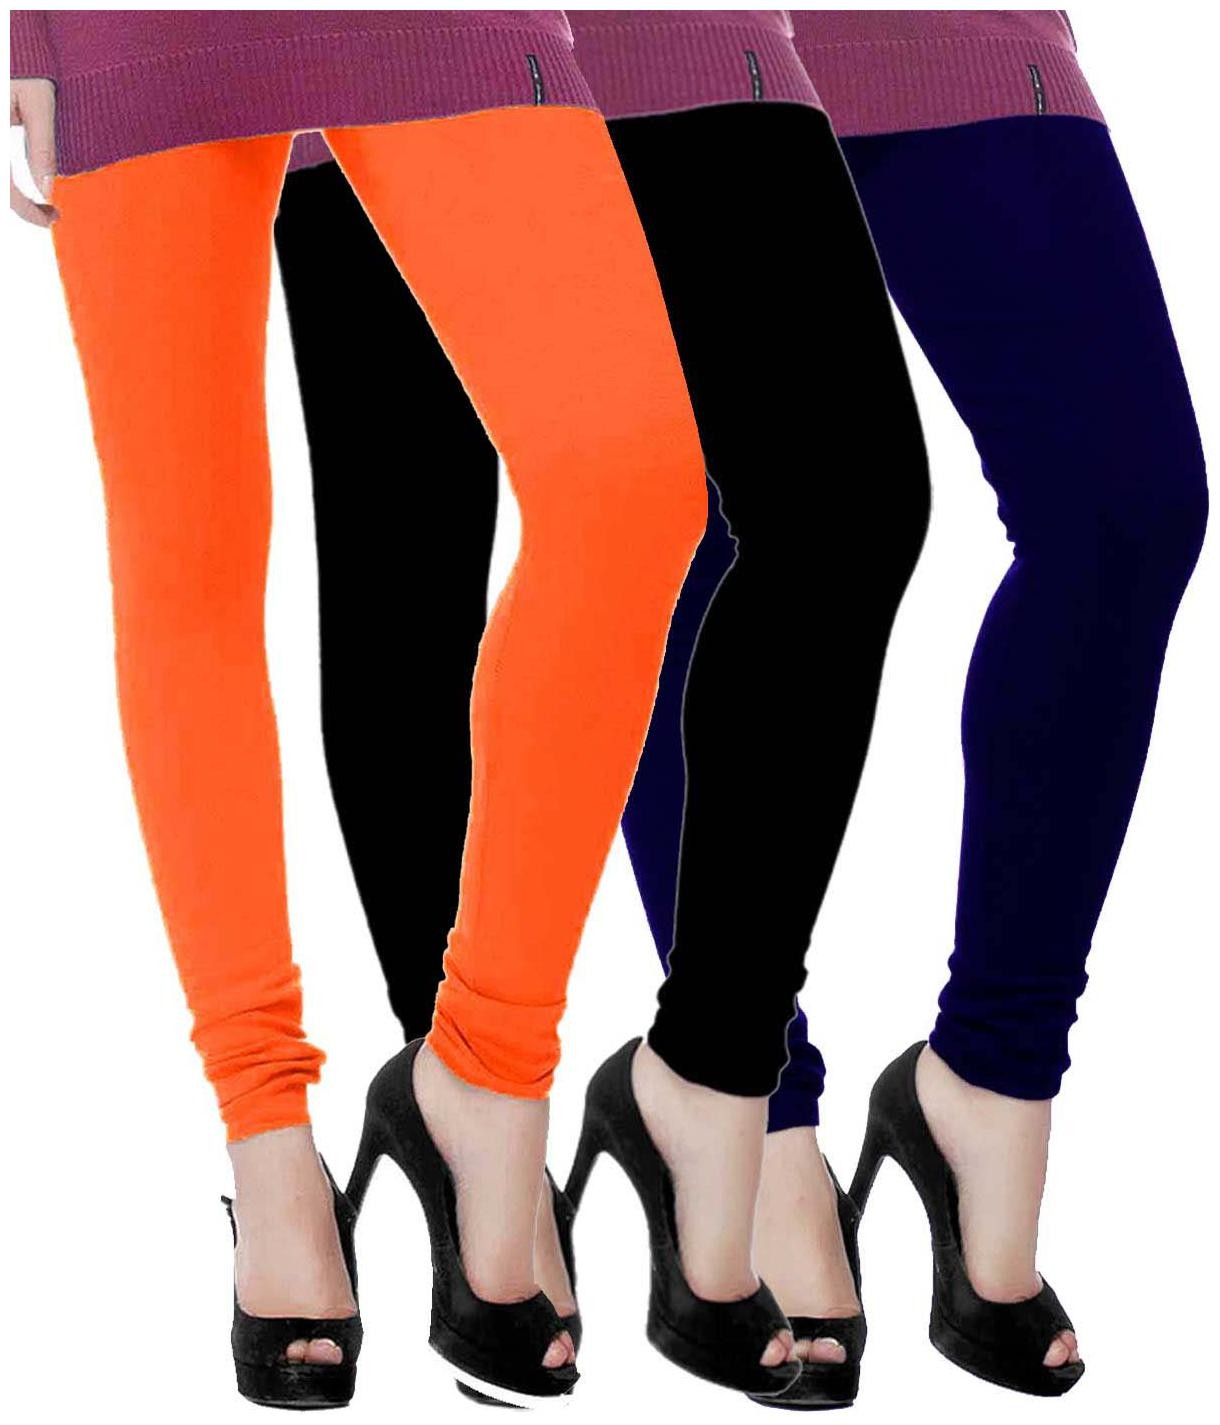 Buy Leggings for Women Online at lowest price - Sabhyata-cacanhphuclong.com.vn